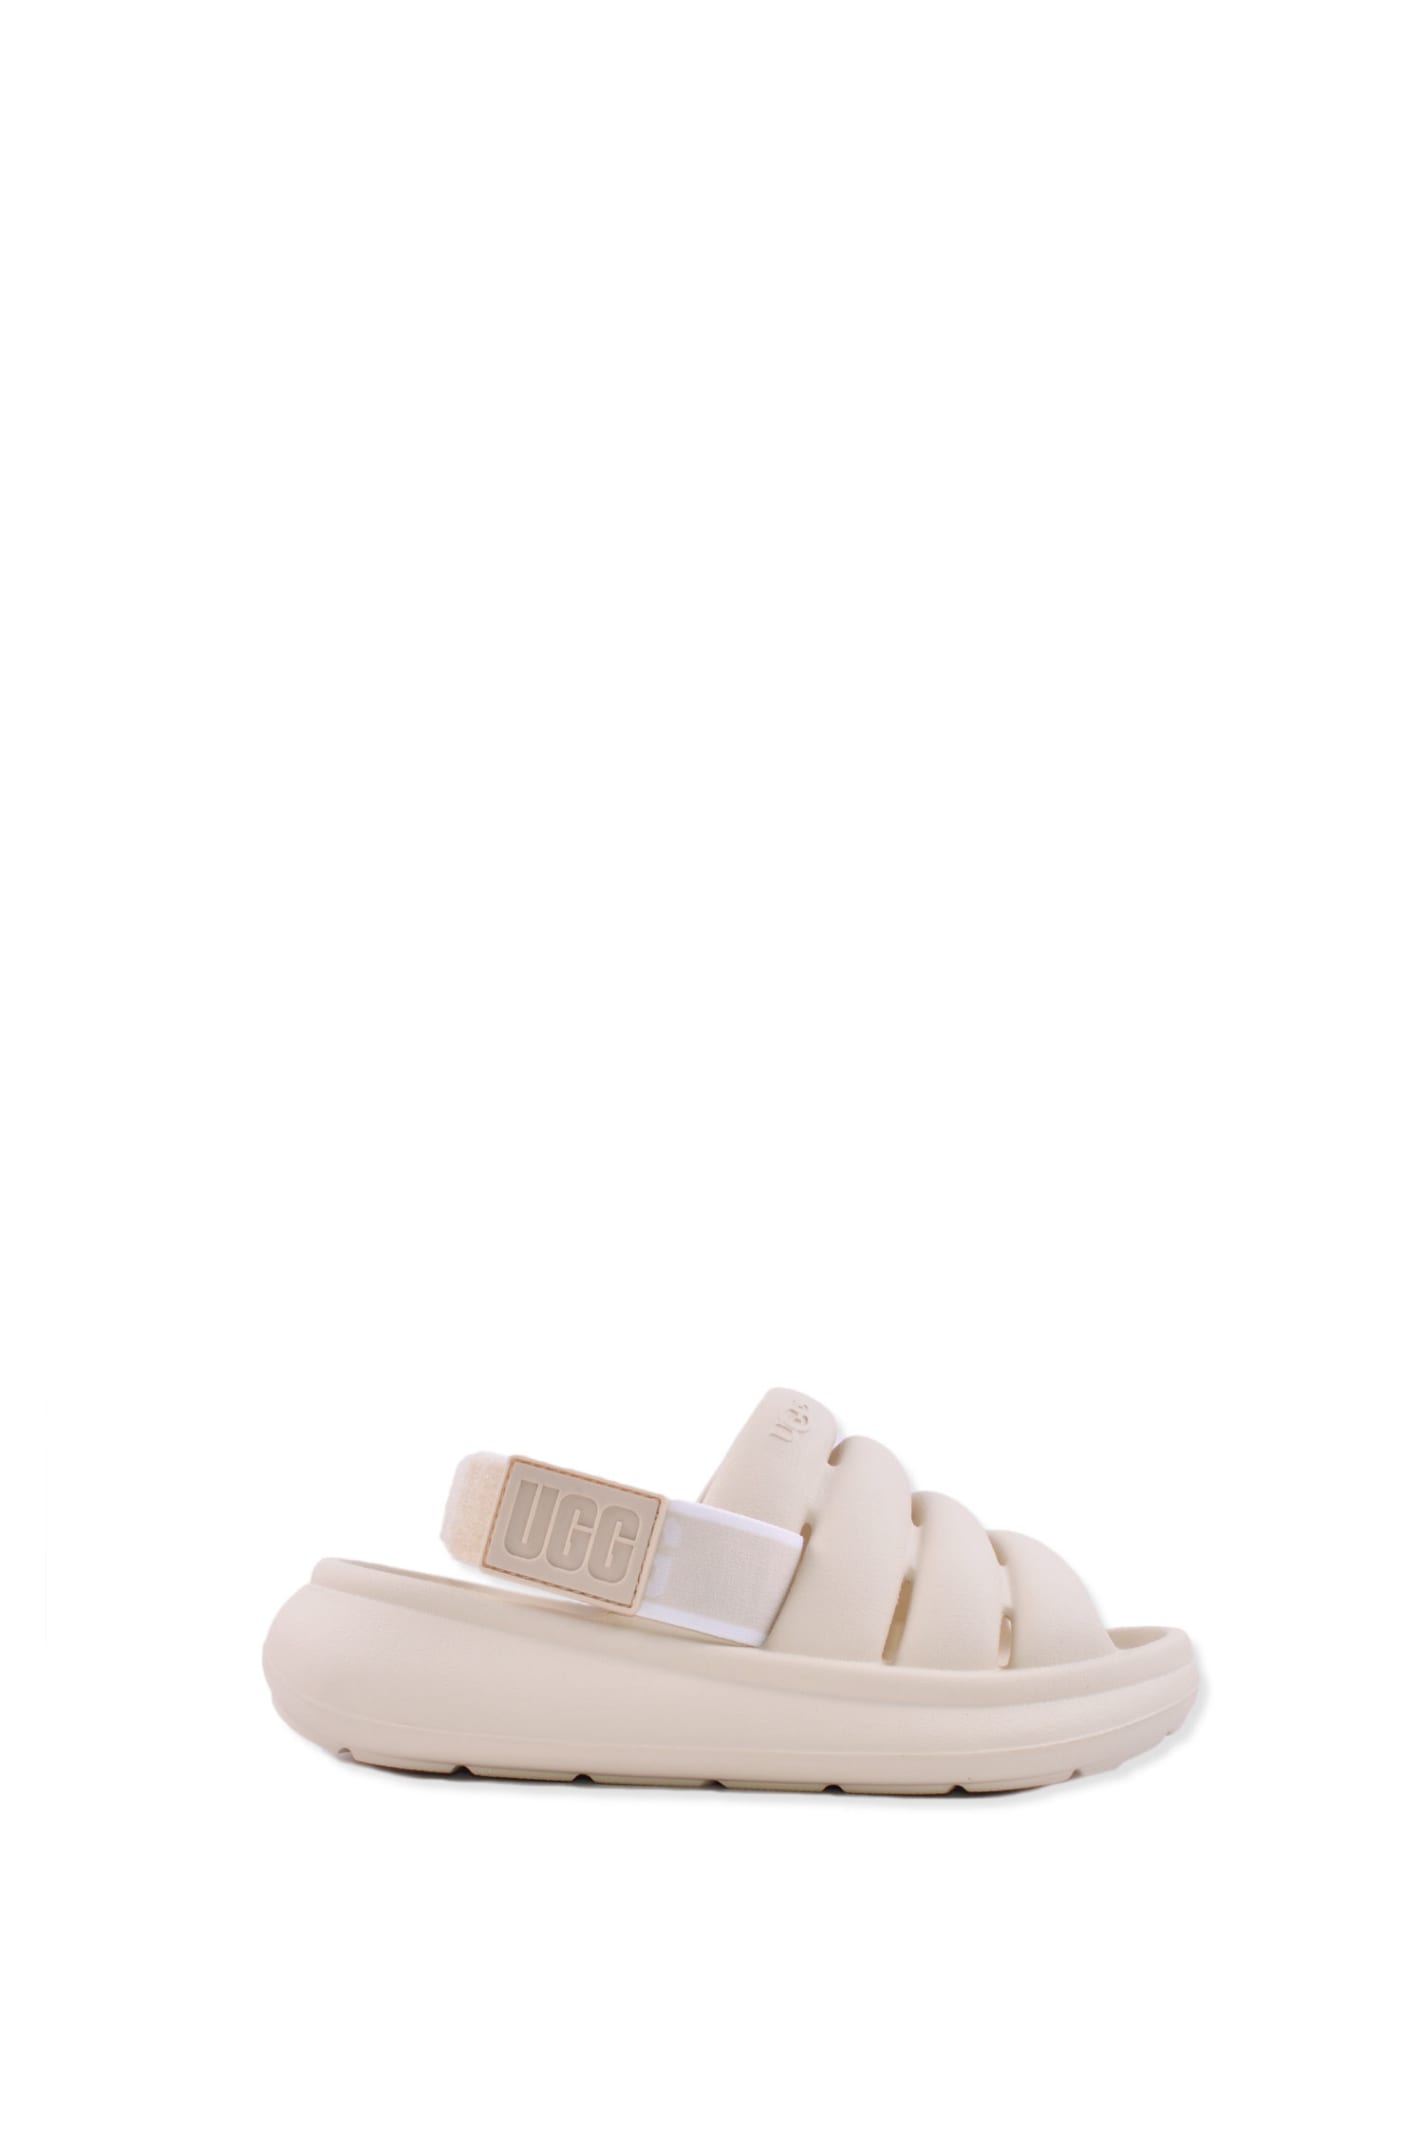 Ugg Kids' Sandals With Strap In White